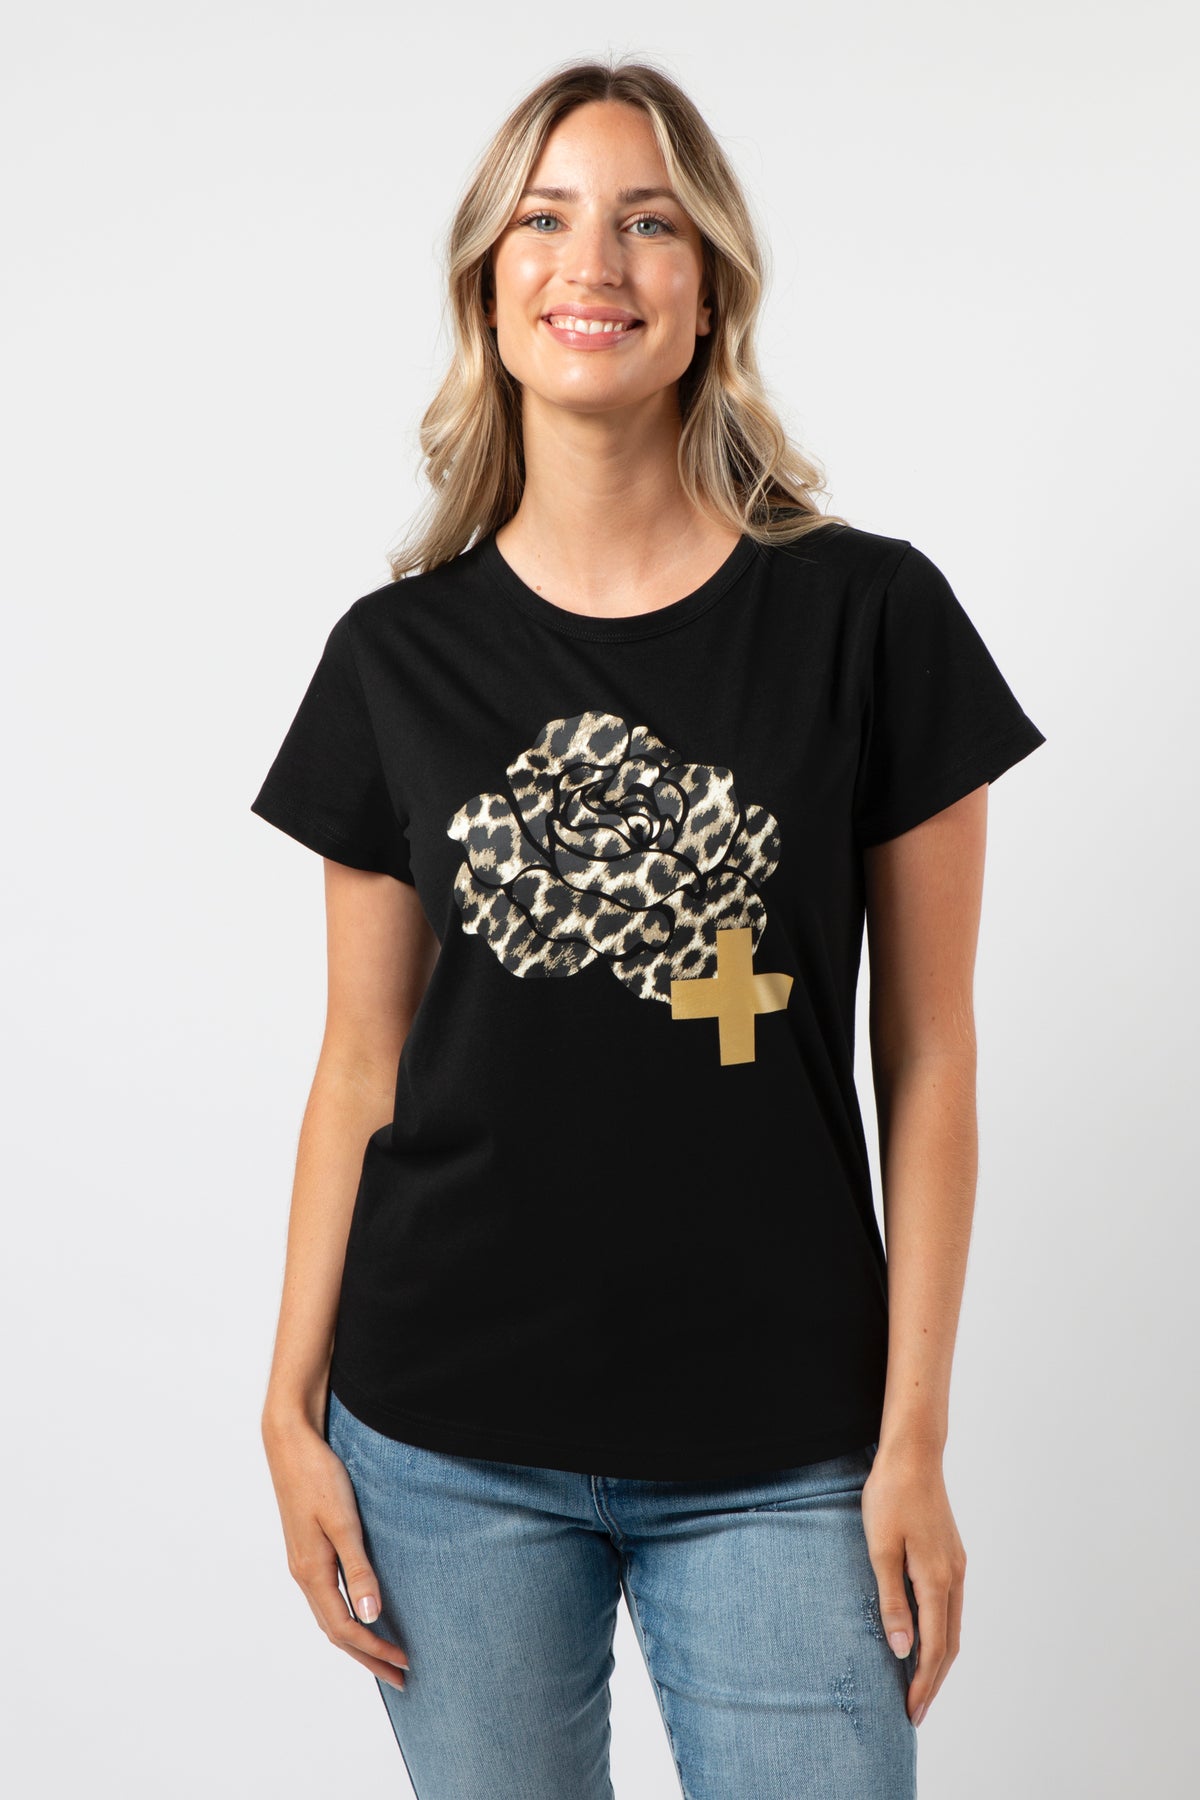 T-Shirt Black With Leopard Rose